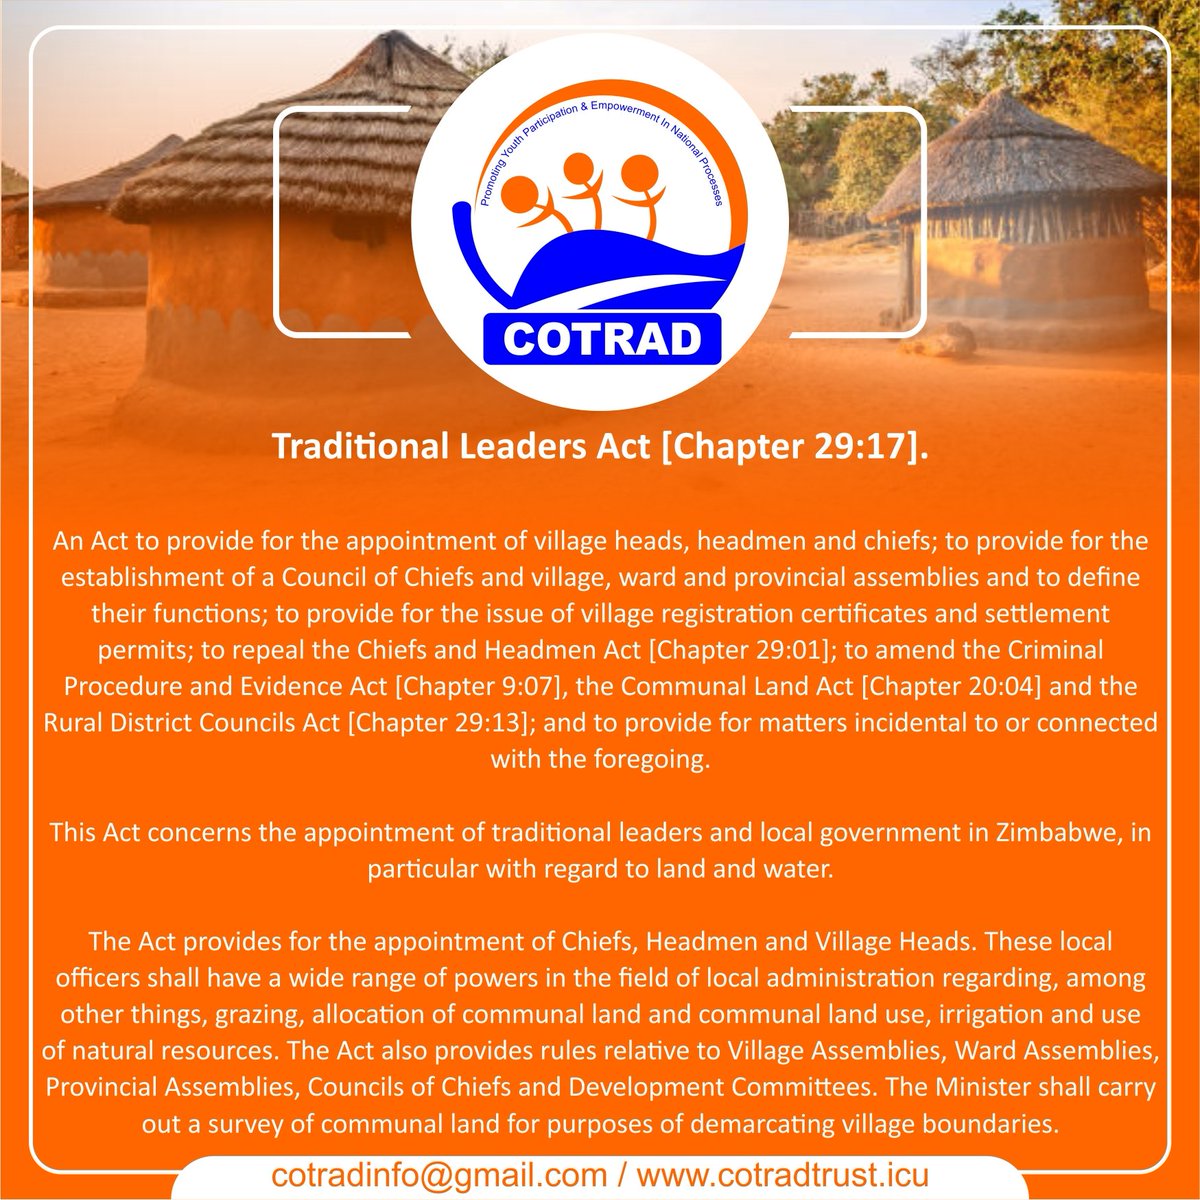 This Act concerns the appointment of traditional leaders and local government in Zimbabwe, in particular with regard to land and water. @ZivaVoters @LeahMatavire @zivanaimuzorodz @NhimbeFM @Brightonramusi @WalpeAcademy @MACRADTrust @y